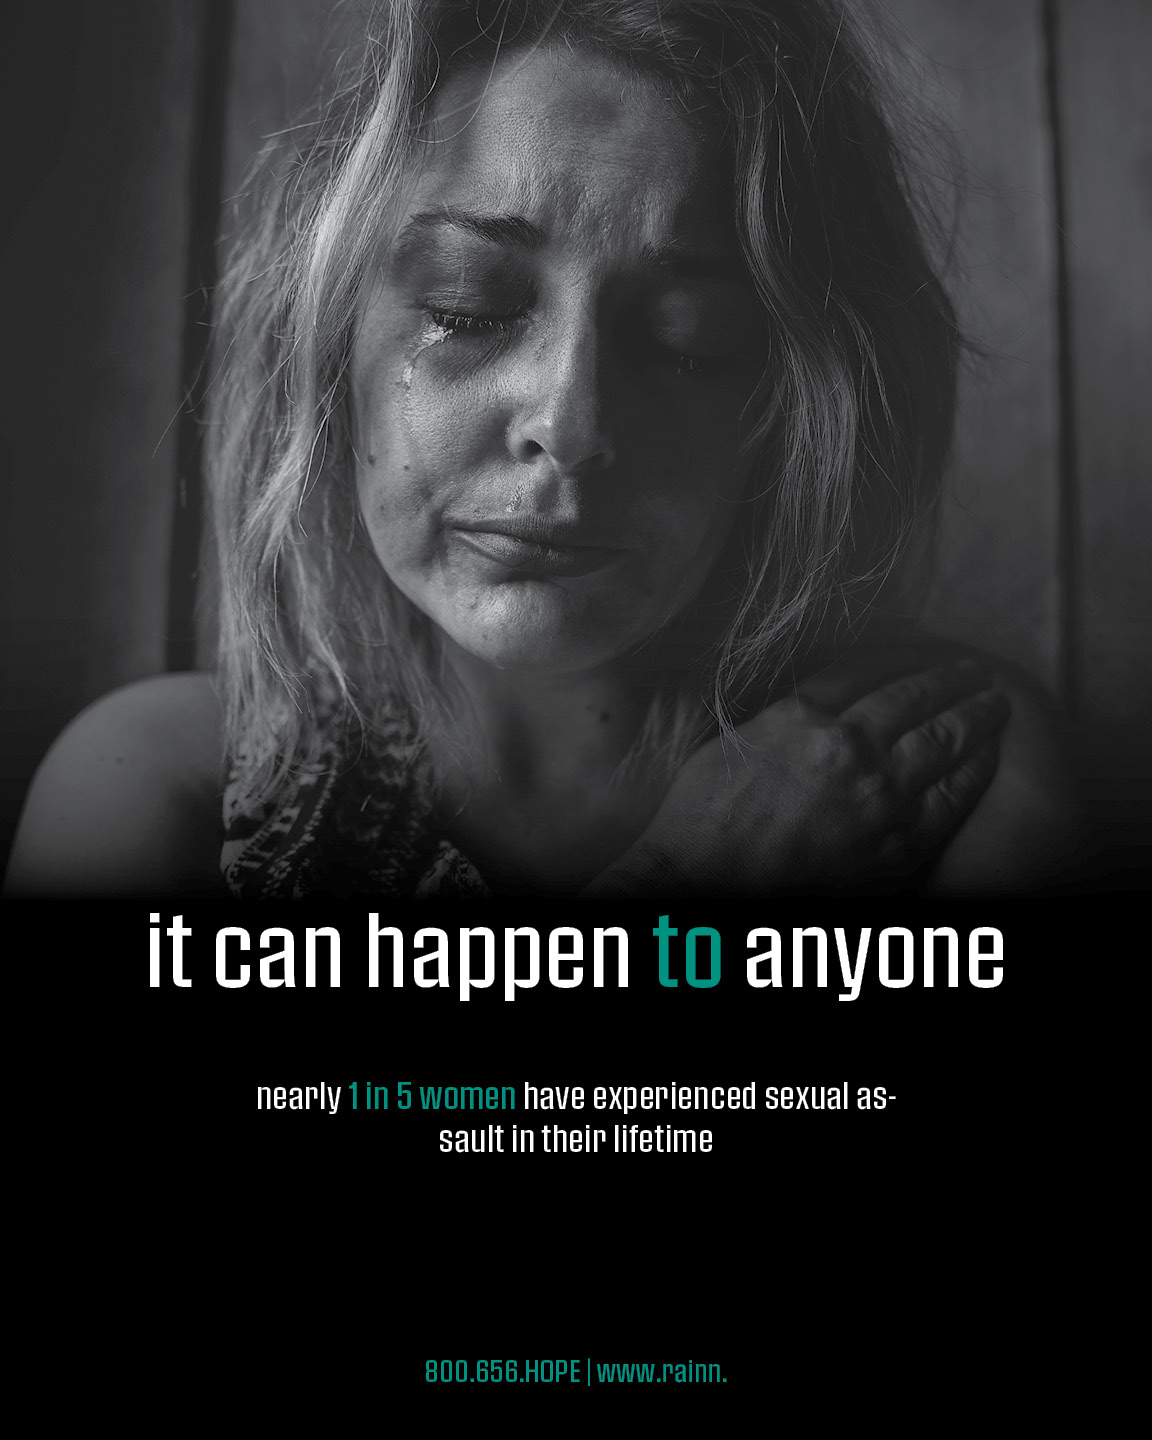 Second version of poster with woman crying